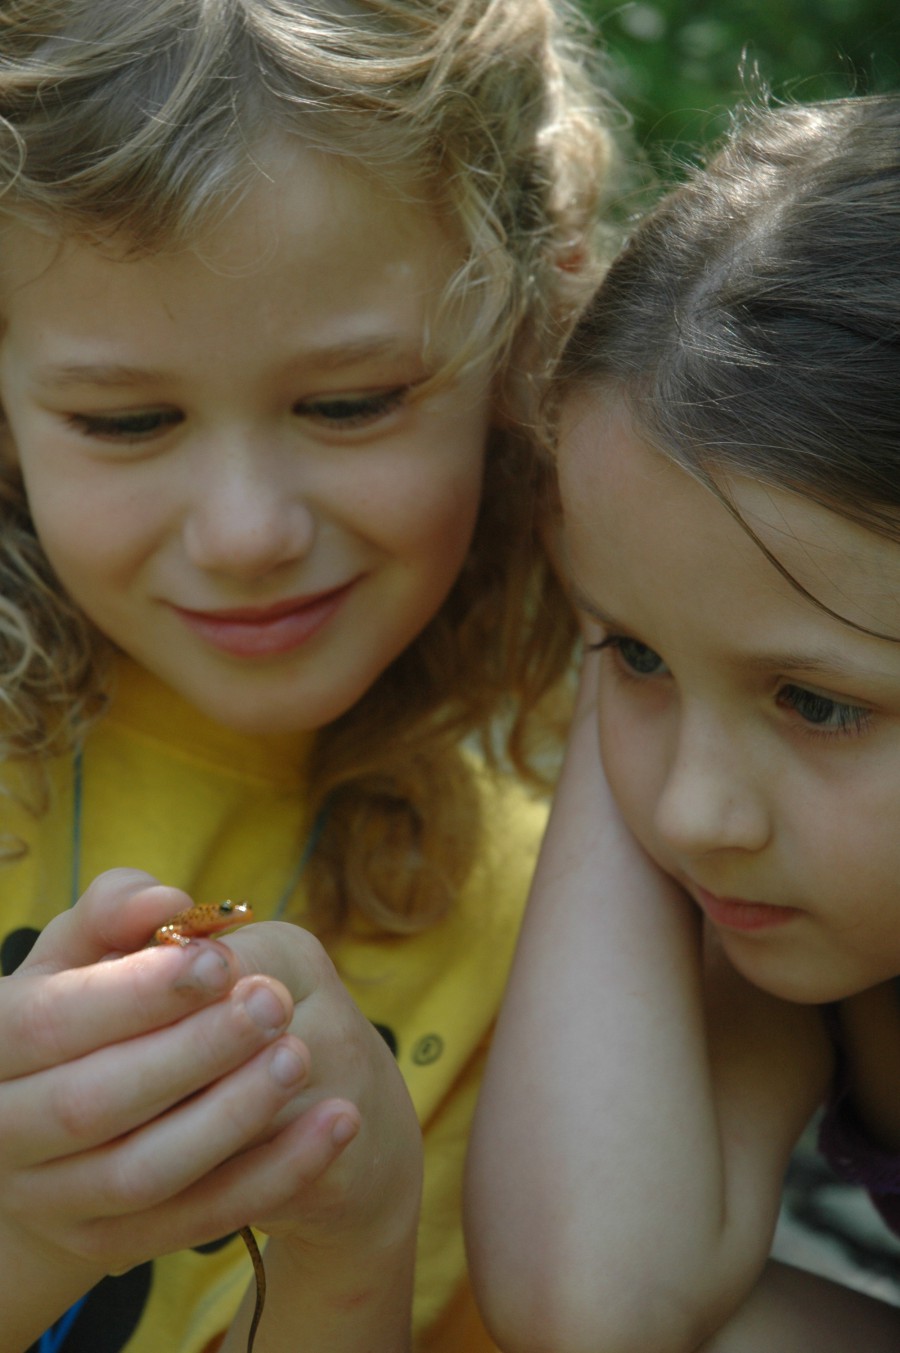 Two girls looking at a small orange frog